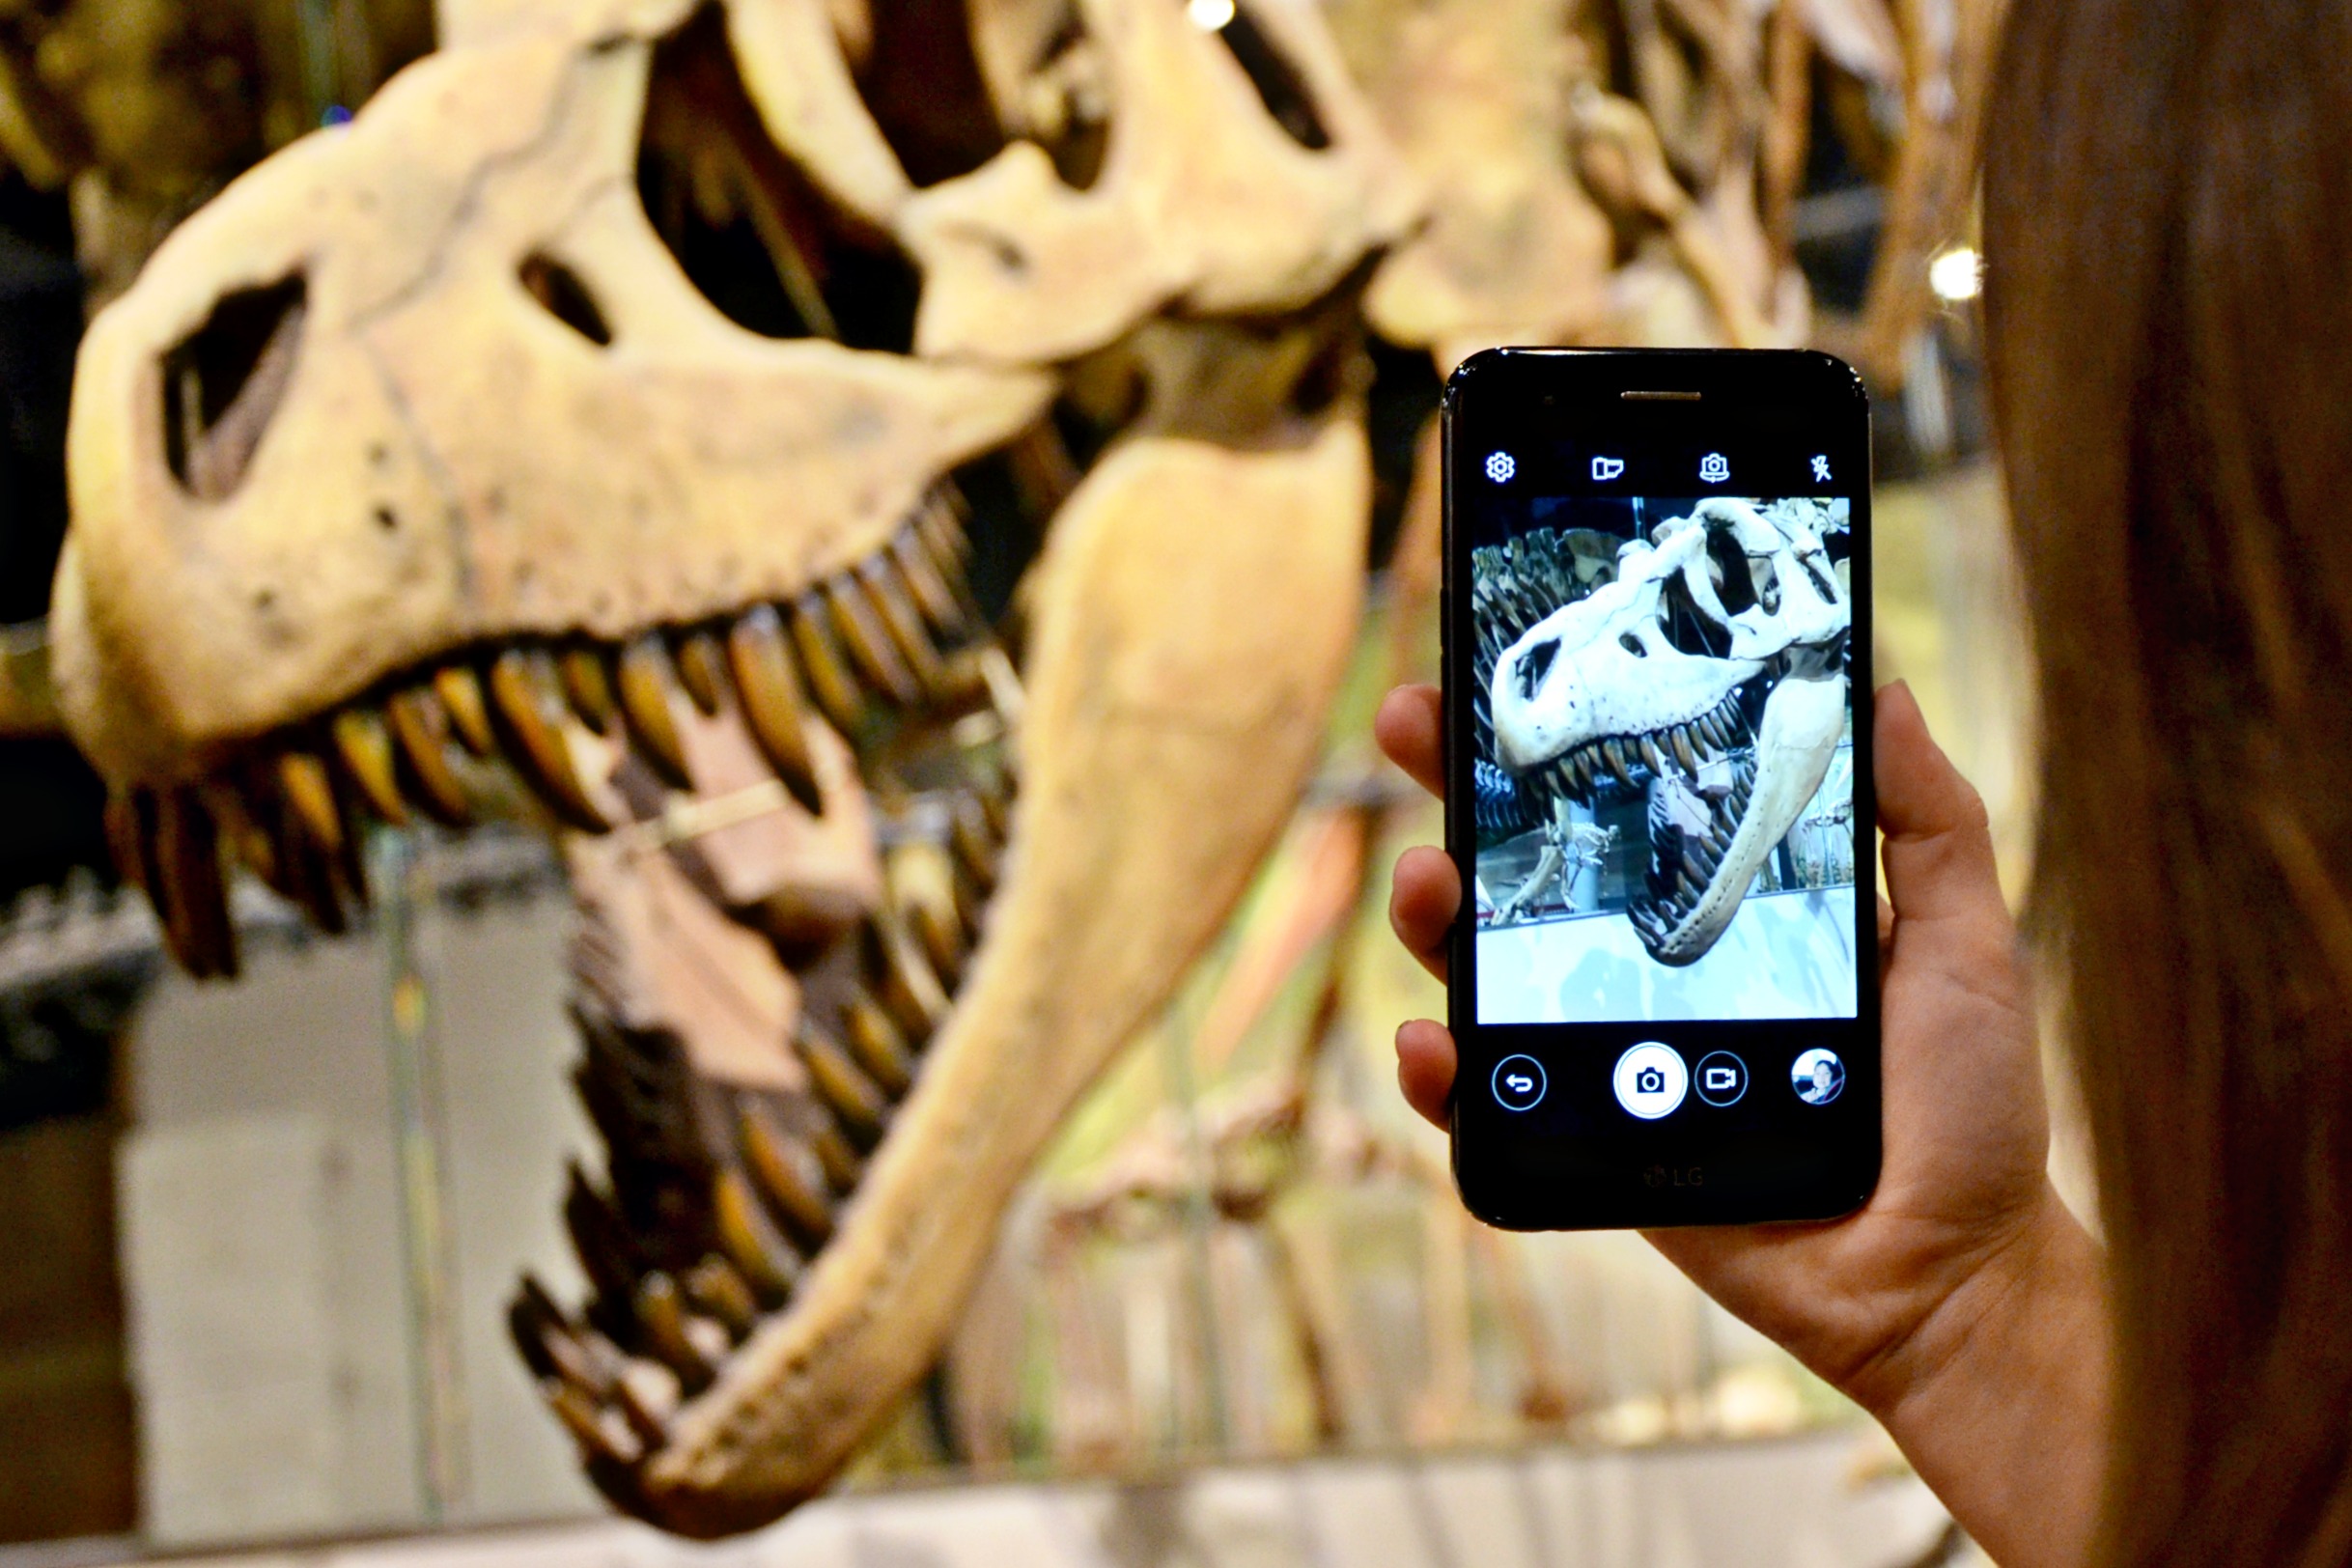 Visit the dinosaur museum then bring your favorite memories home with these tips for printing your summer photos at home.